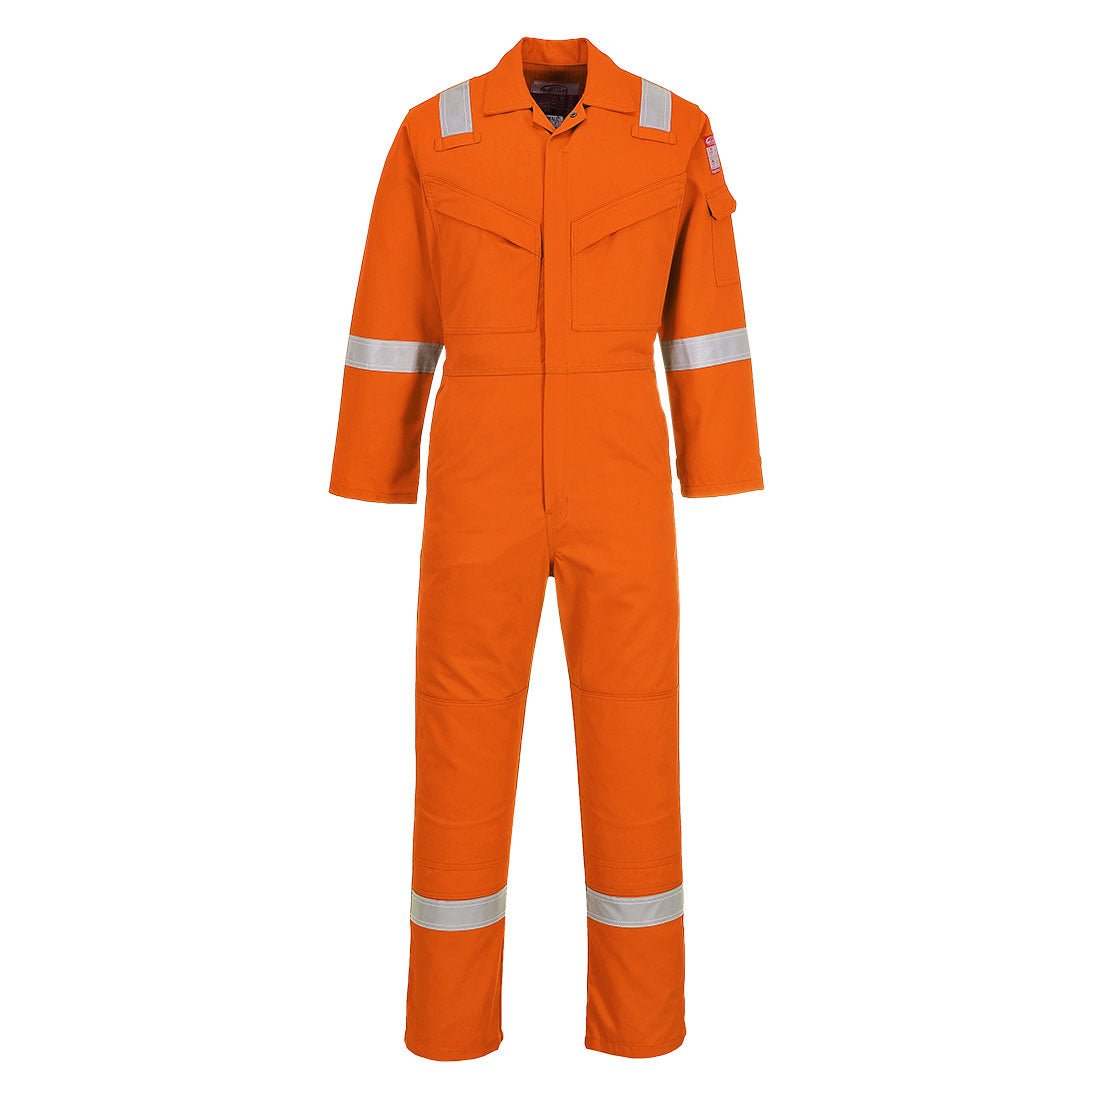 Flame Resistant Super Light Weight Anti-Static Coverall 210g - arbeitskleidung-gmbh